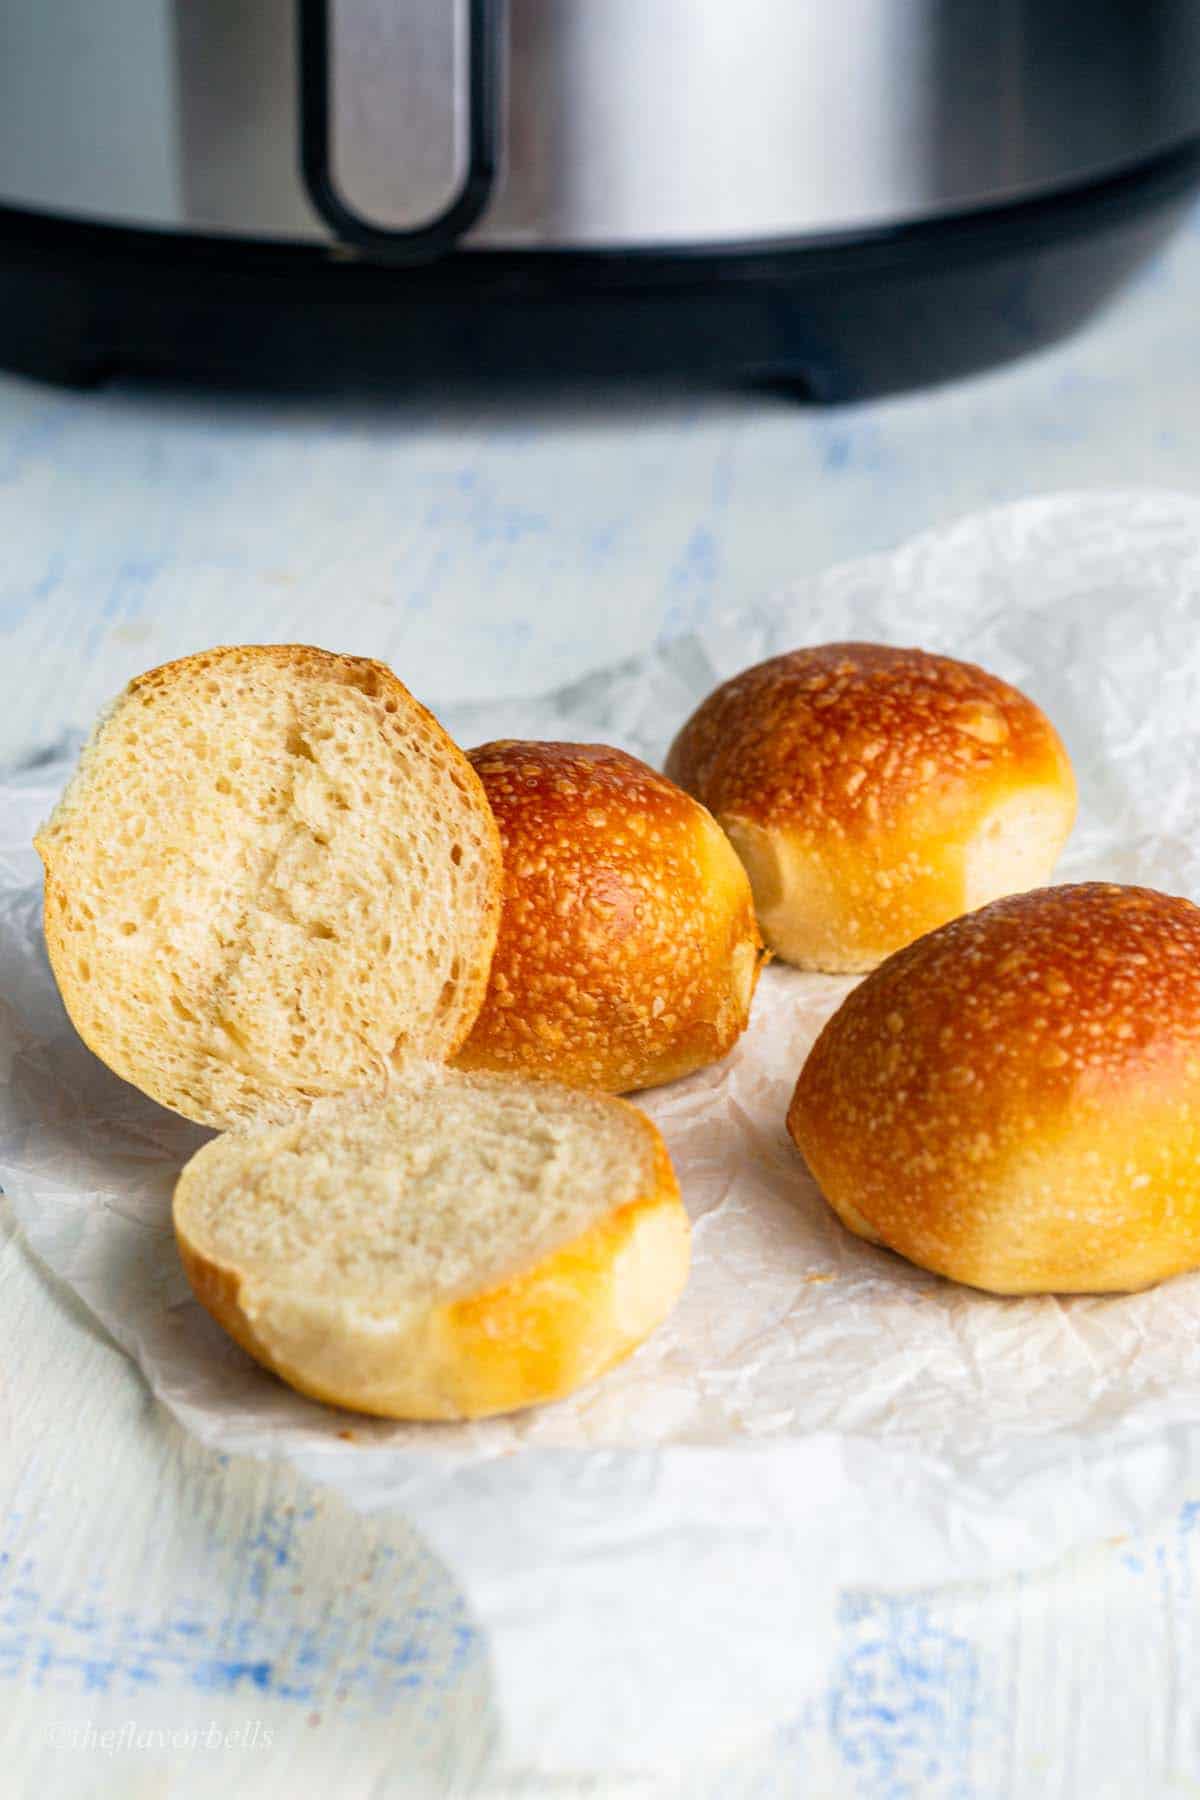 4 dinner rollsa that are made in air fryer